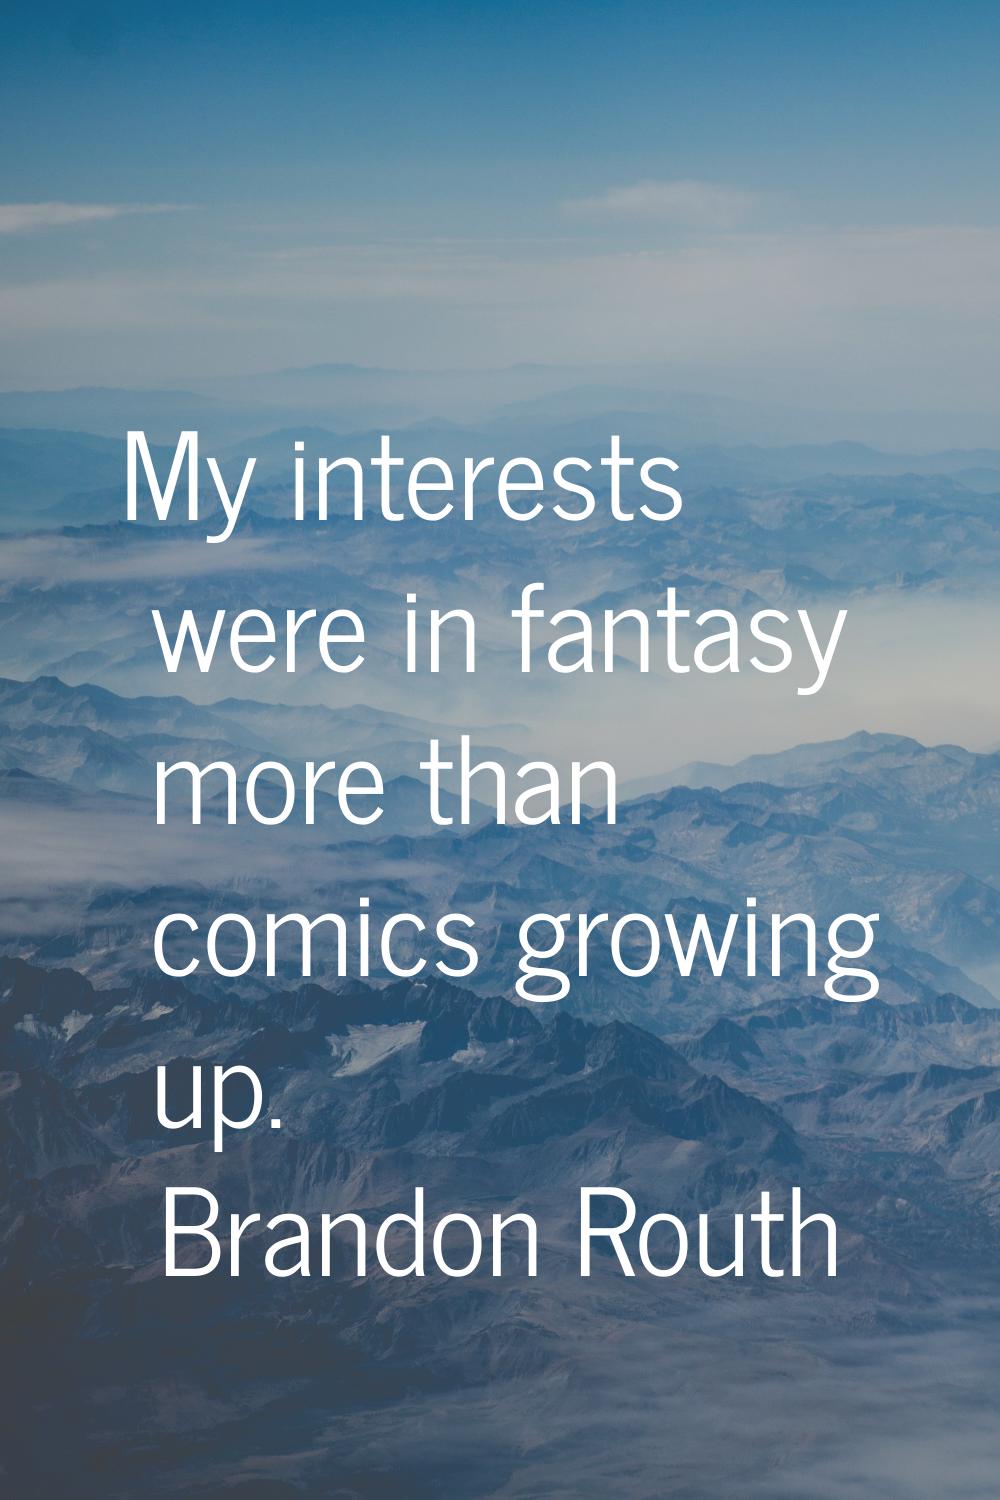 My interests were in fantasy more than comics growing up.